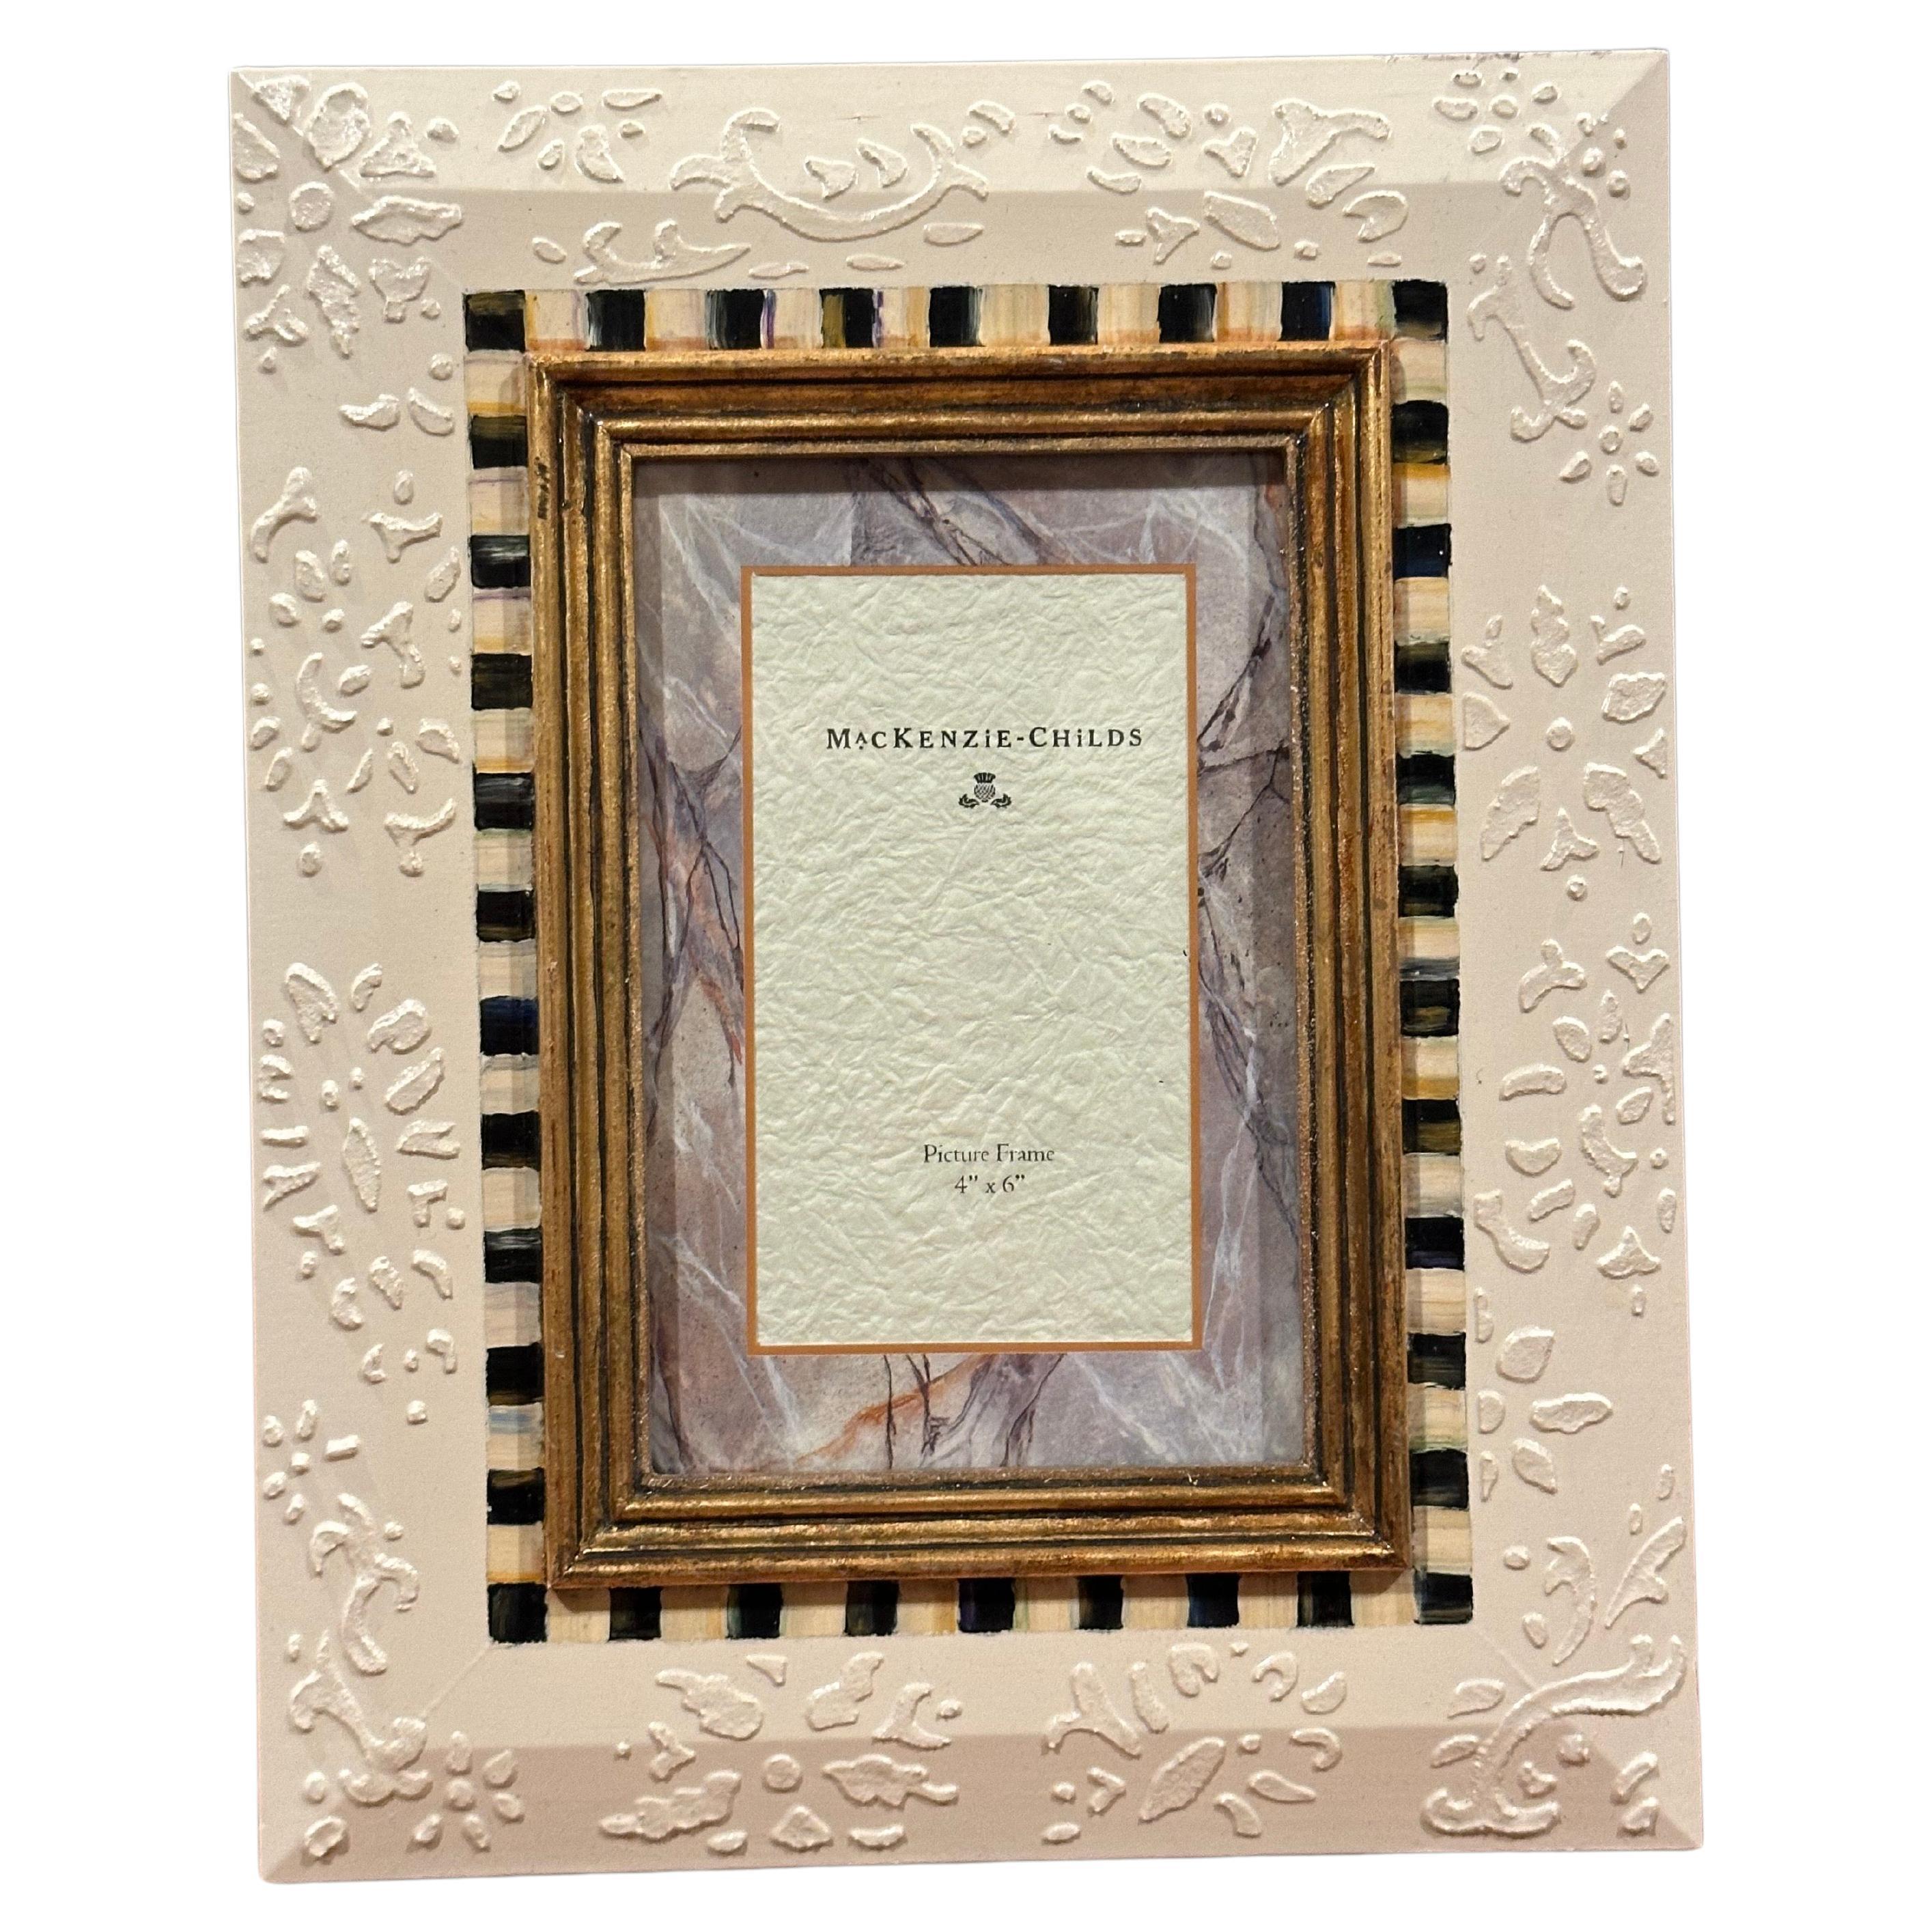 A nice hand painted picture frame by MacKenzie Childs, circa 1990s. The frame is in new unused condition and is for a 4